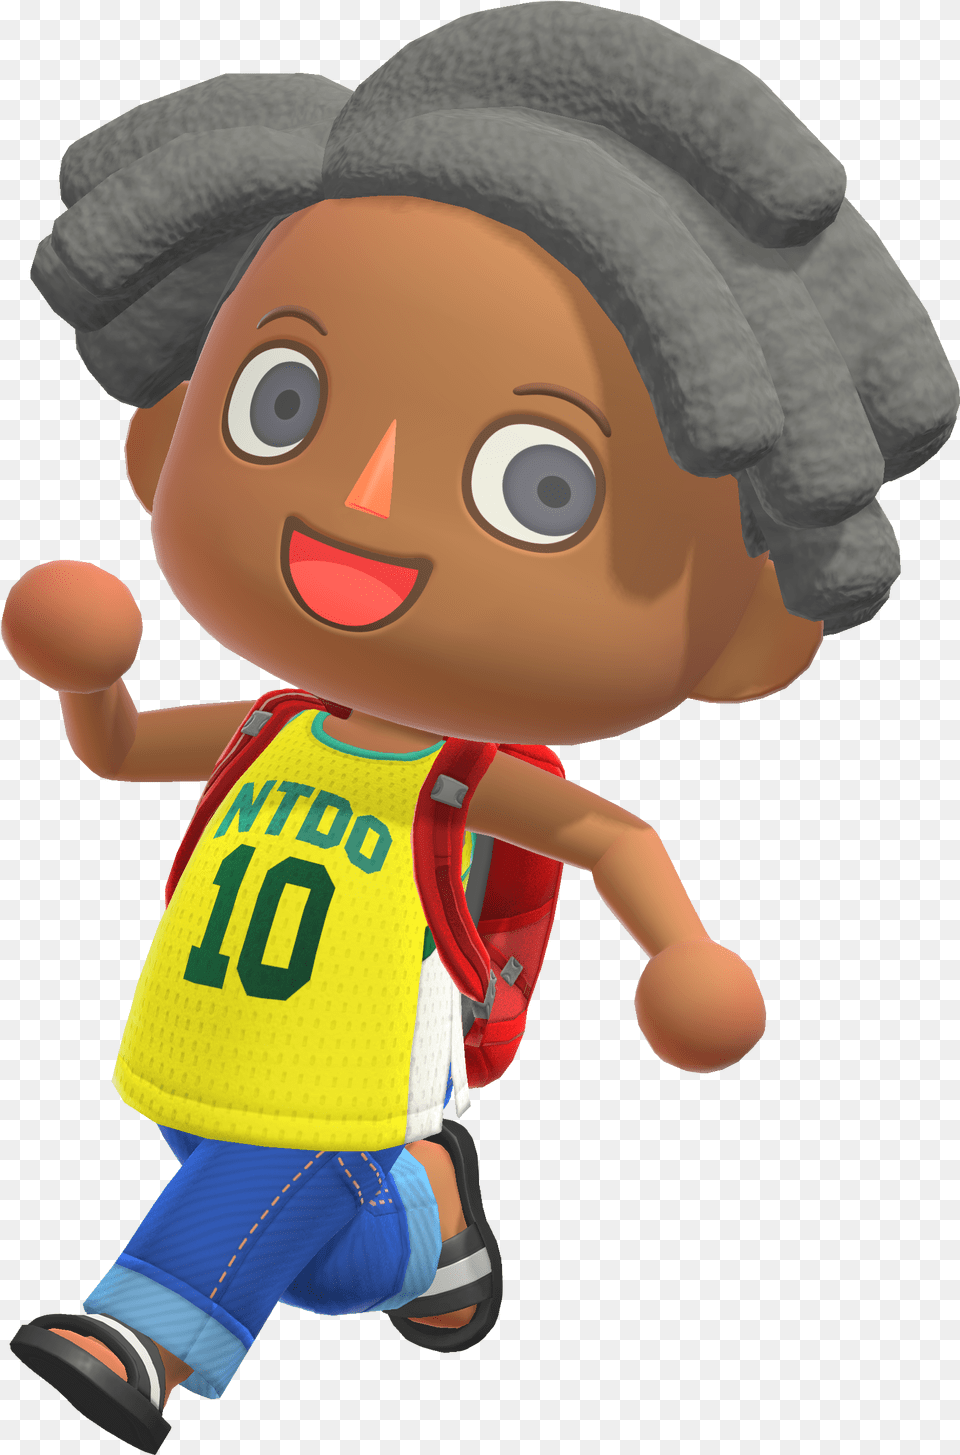 New Hairstyles Bags Flowers Revealed In Amazing Animal Animal Crossing New Horizons Afro, Doll, Toy, Baby, Person Free Transparent Png